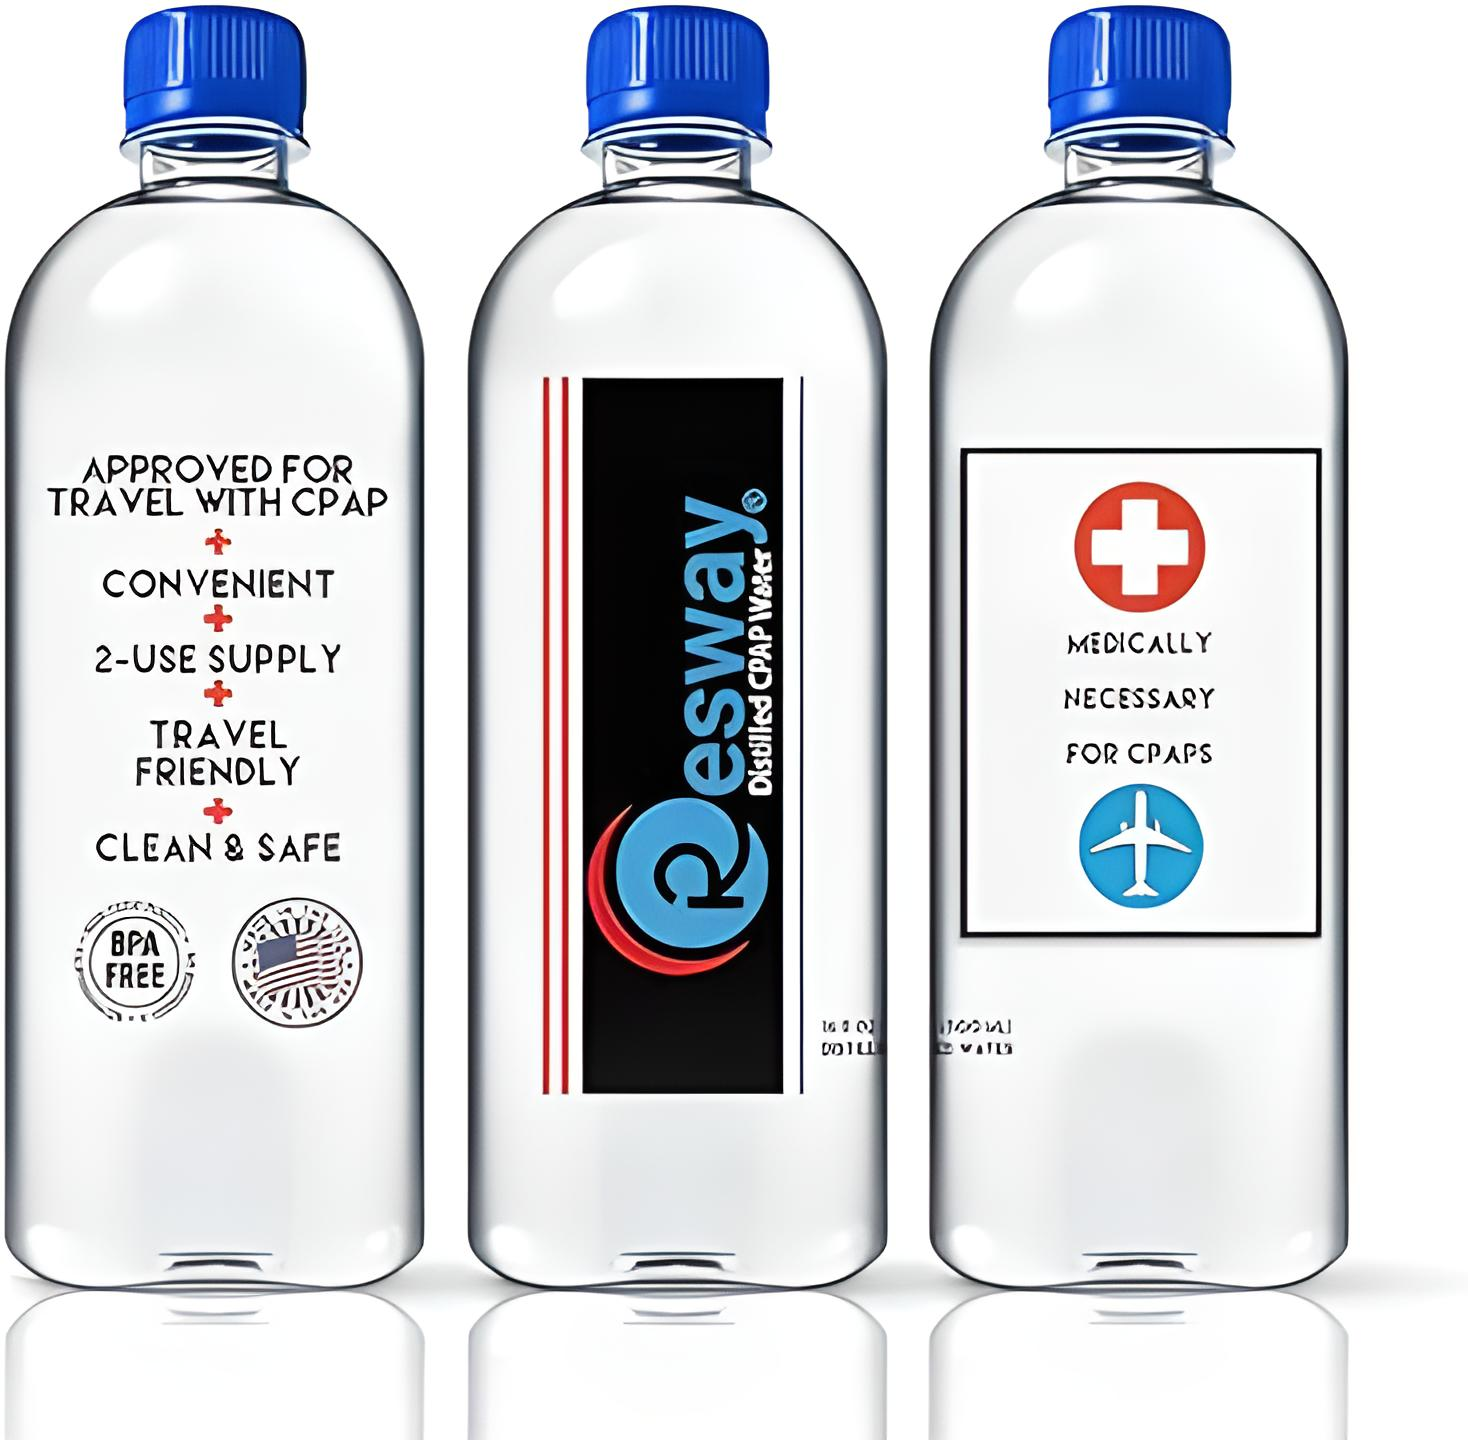 Three bottles of Resway brand distilled CPAP water, labeled for use with CPAP machines for asthma and sleep apnea patients.